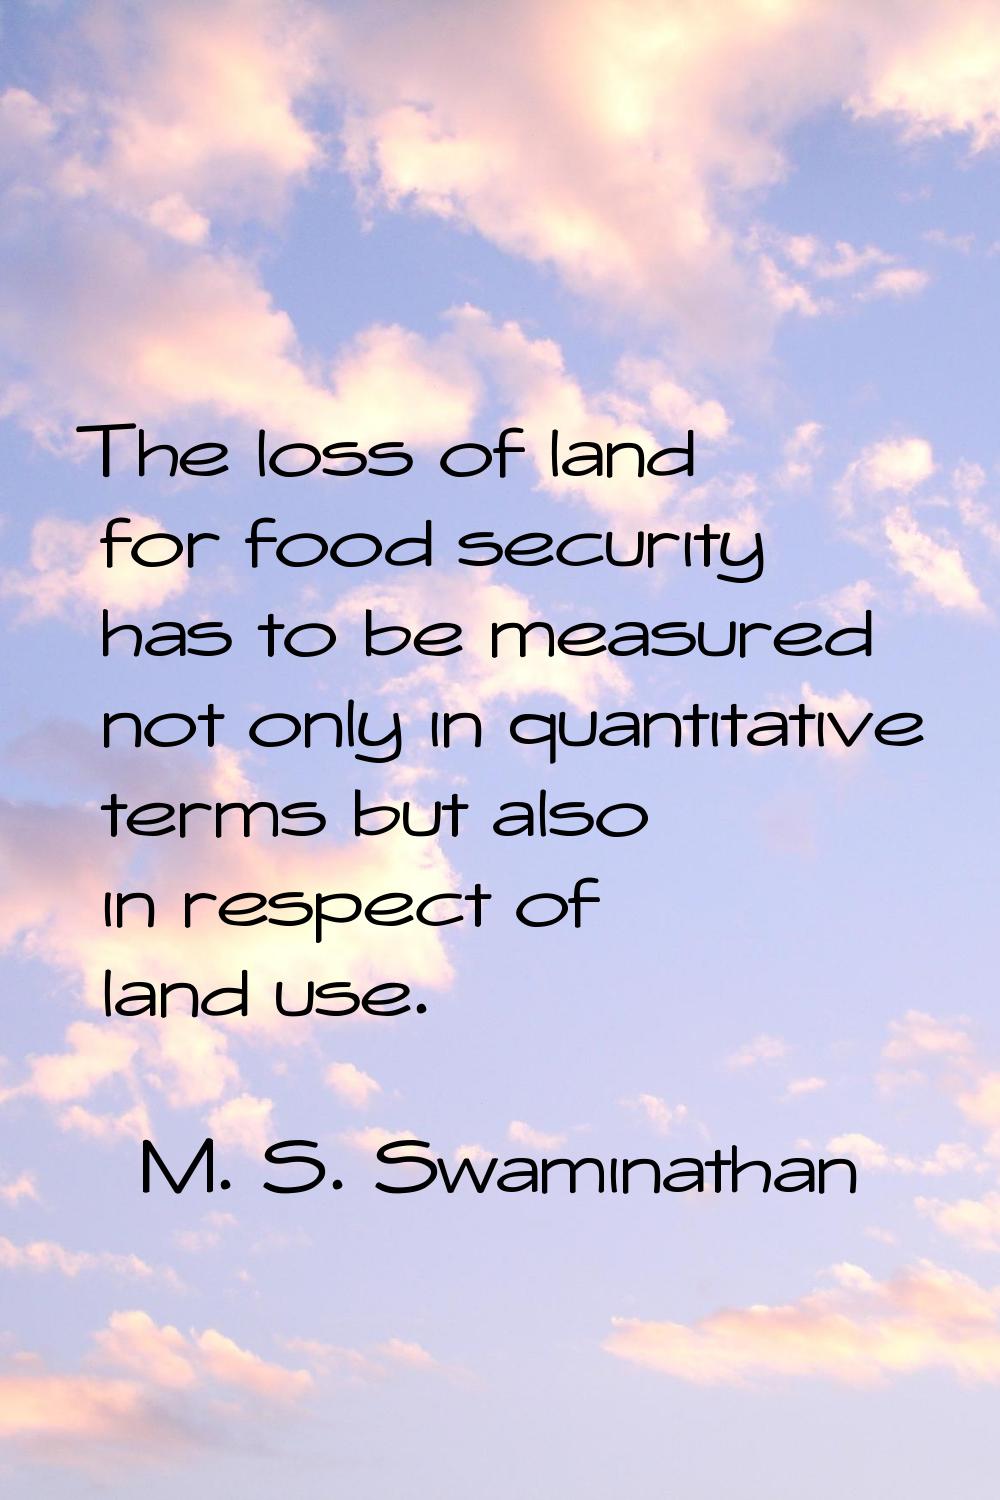 The loss of land for food security has to be measured not only in quantitative terms but also in re